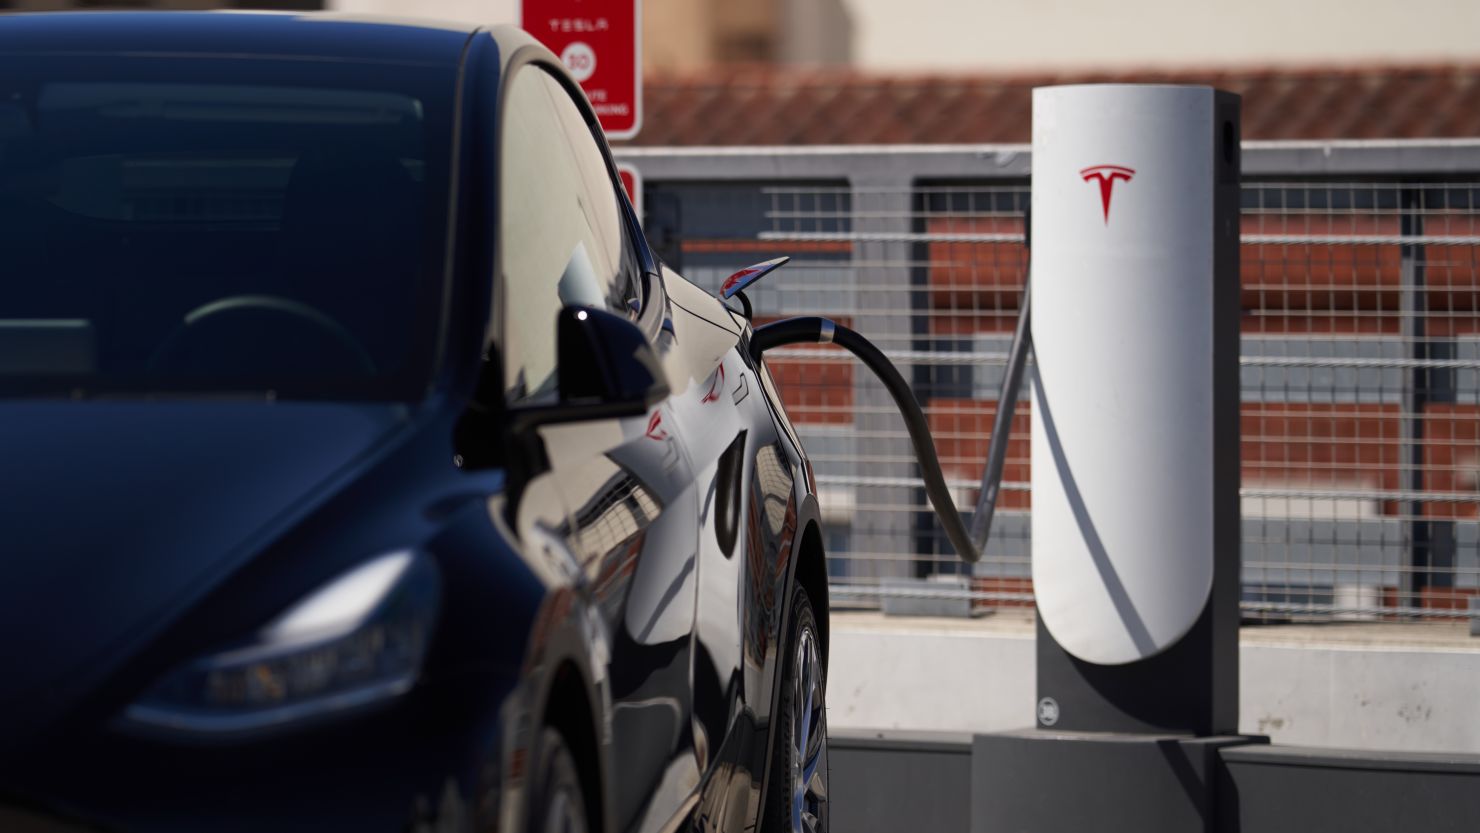 A Tesla charging station in a parking lot in Santa Monica, California, pictured in September 2022.